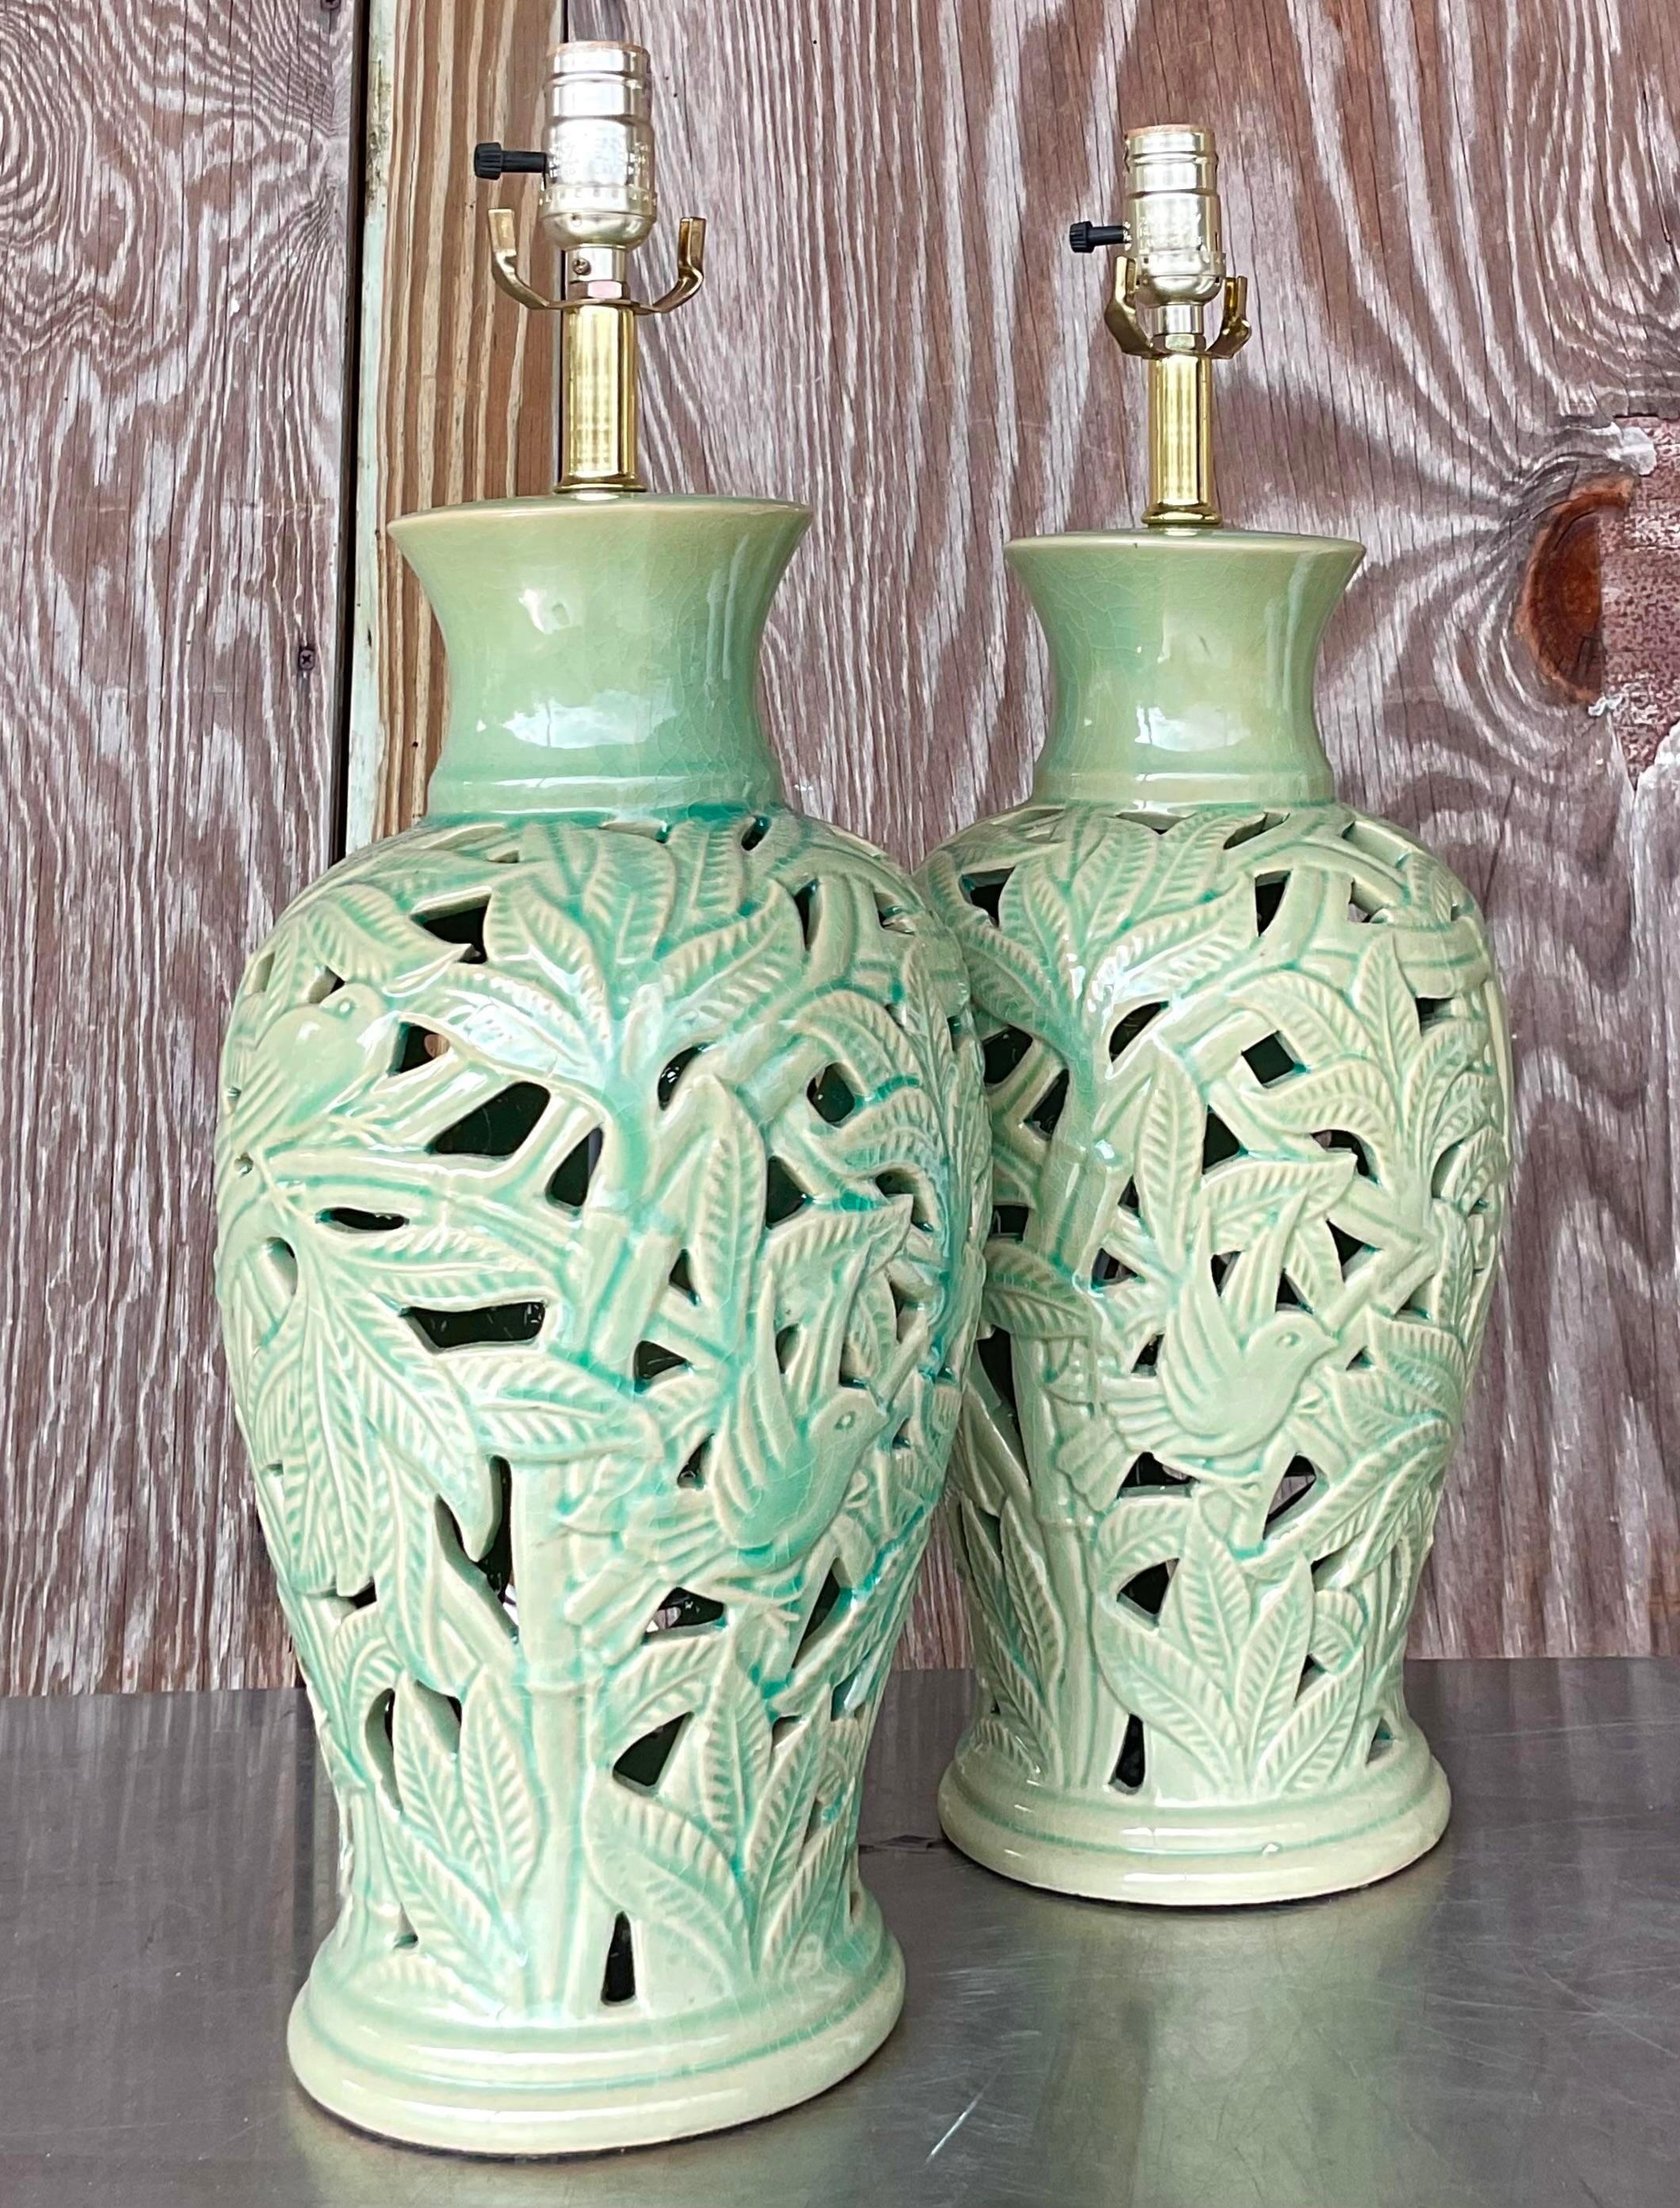 American Vintage Boho Glazed Ceramic Cut Out Leaf Lamps - a Pair For Sale